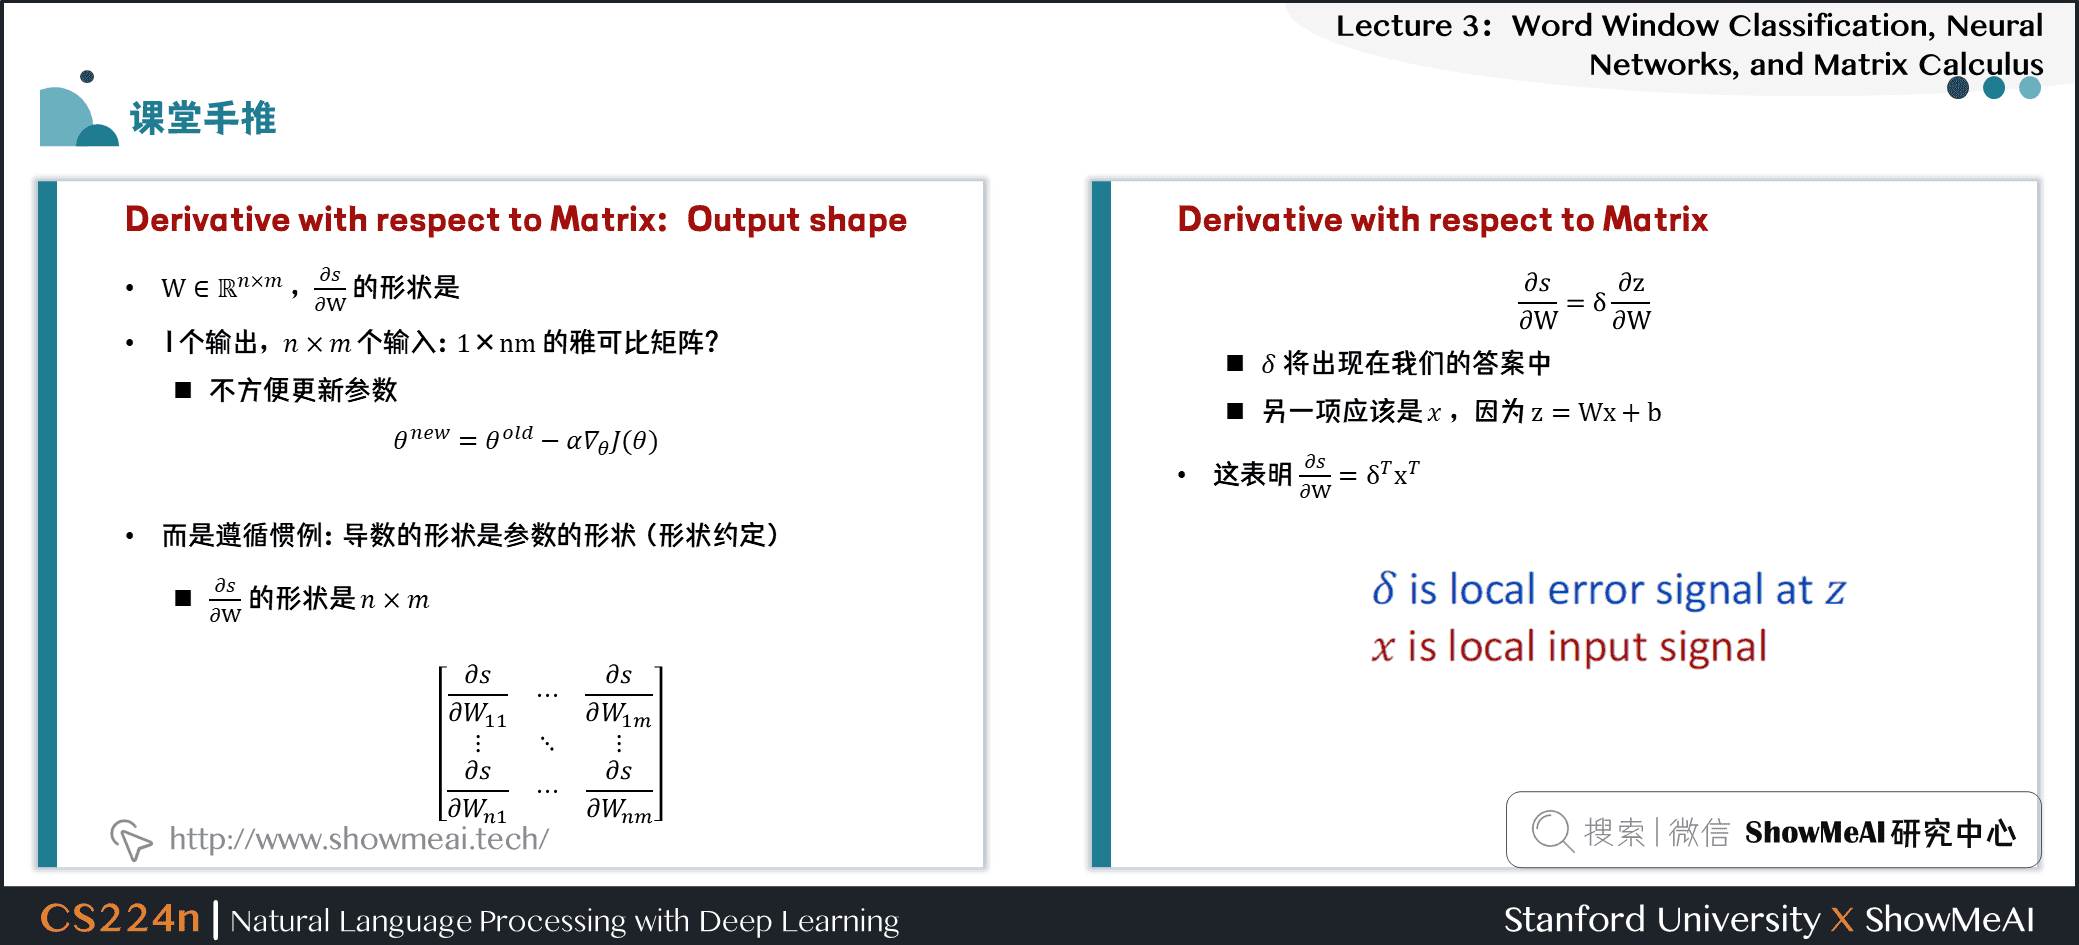 Derivative with respect to Matrix： Output shape，Derivative with respect to Matrix